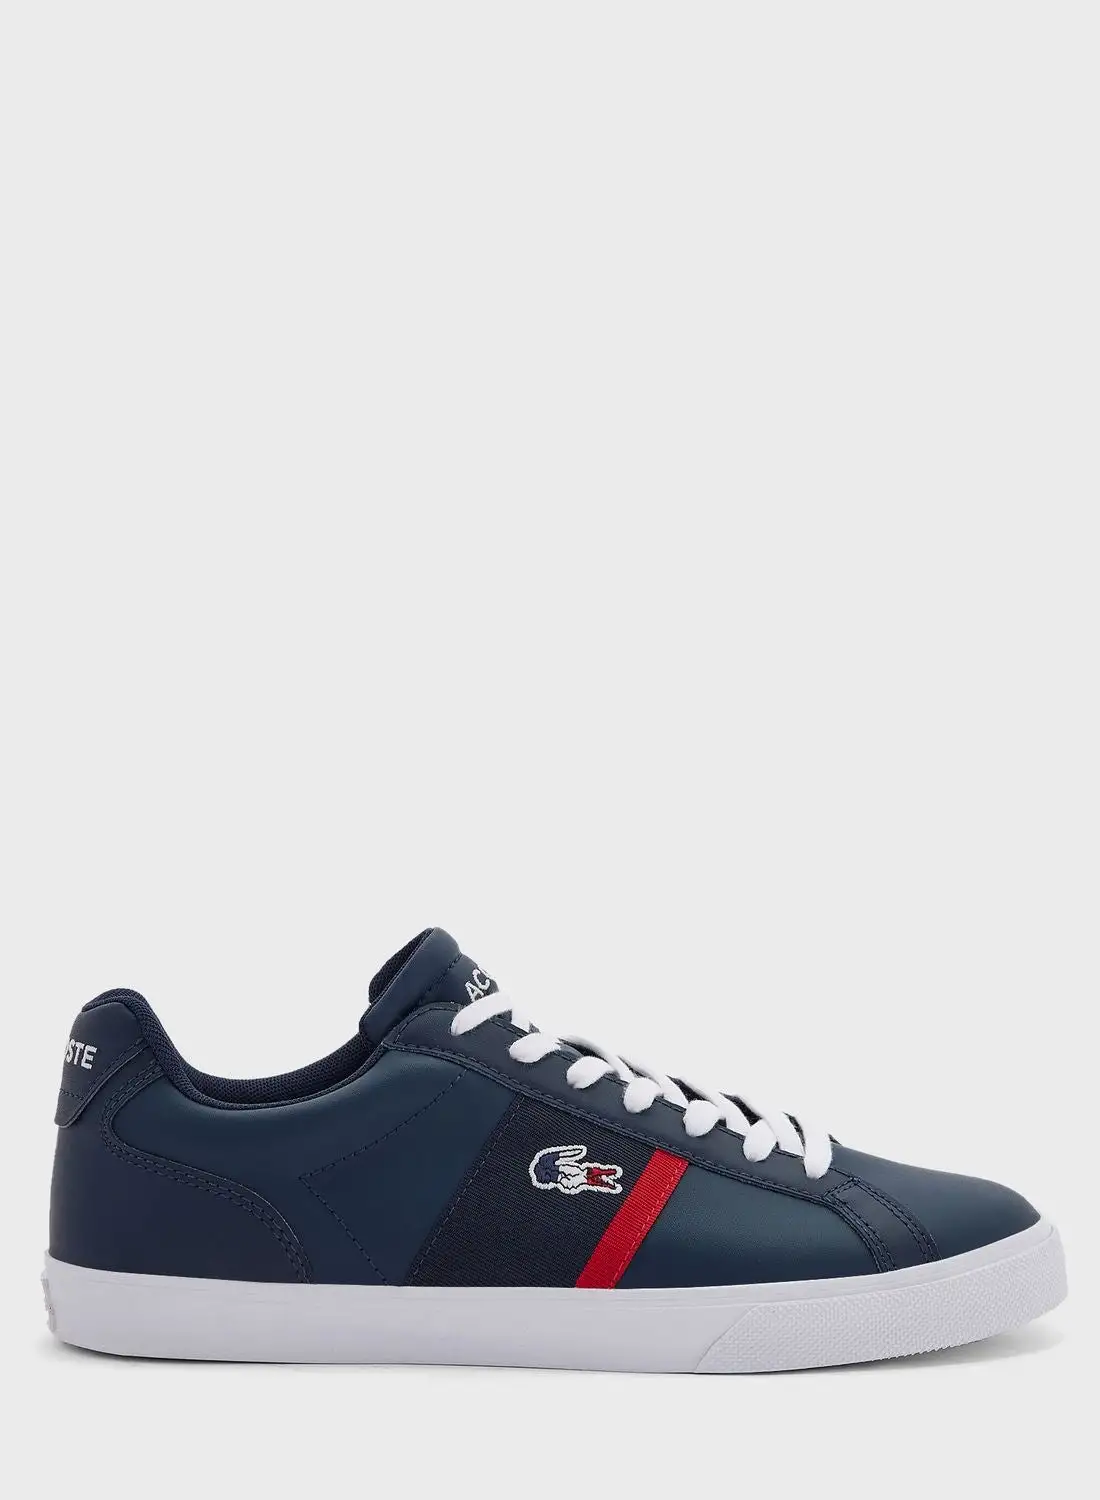 LACOSTE Caual Lace Up Sneakers